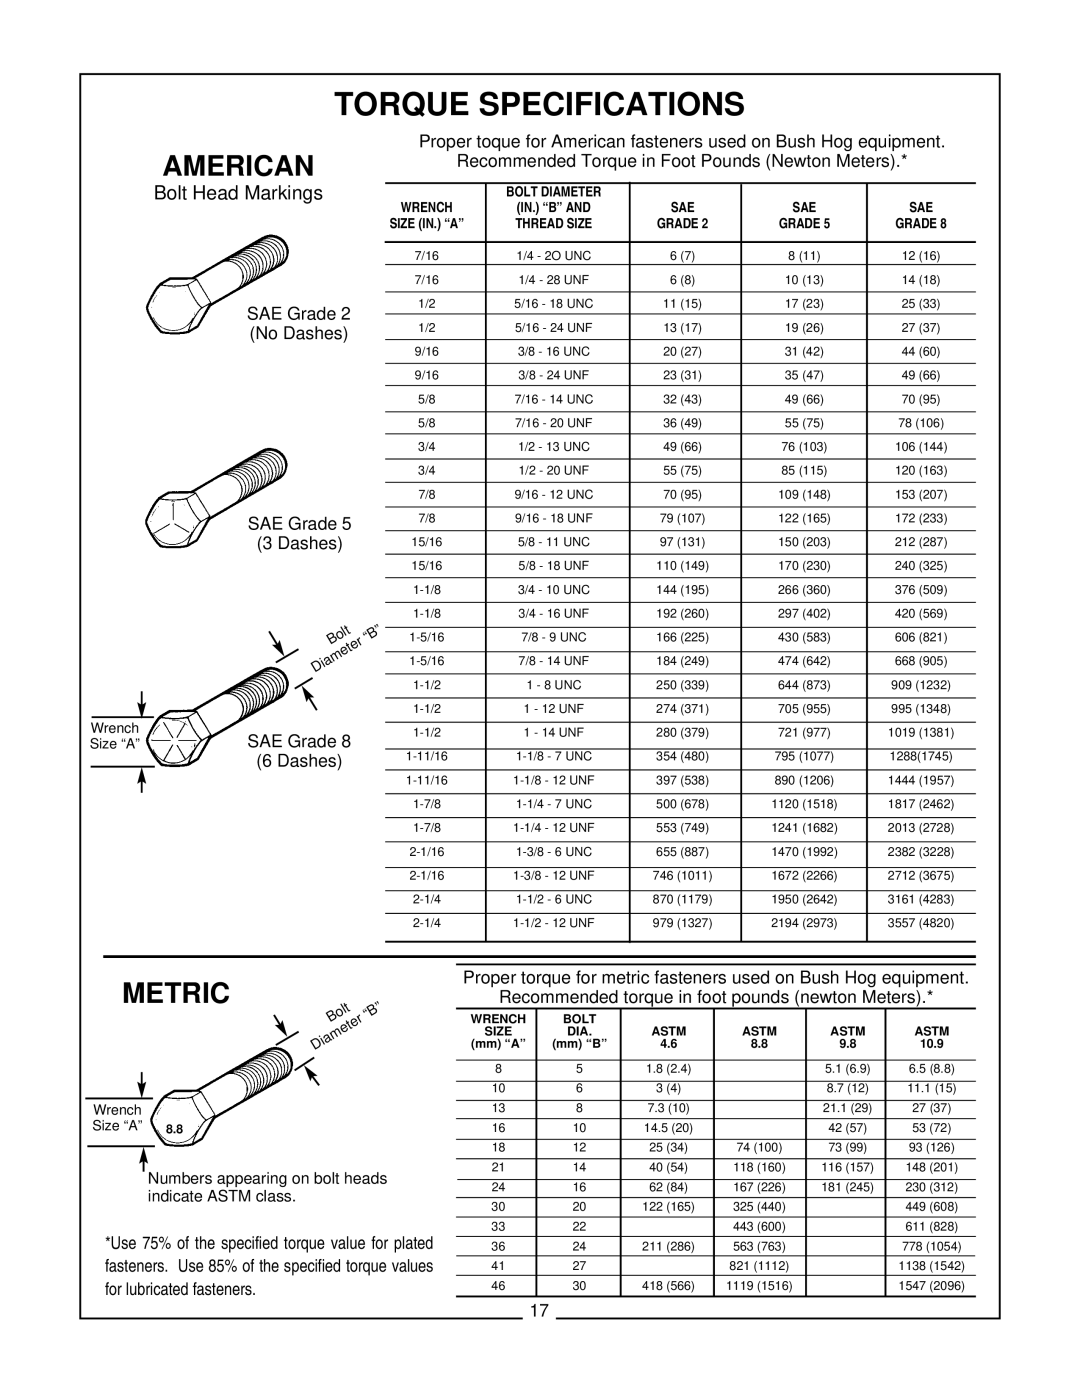 Bush Hog EFM 480/600 Torque Specifications, American, Metric, Numbers appearing on bolt heads indicate ASTM class, Wrench 